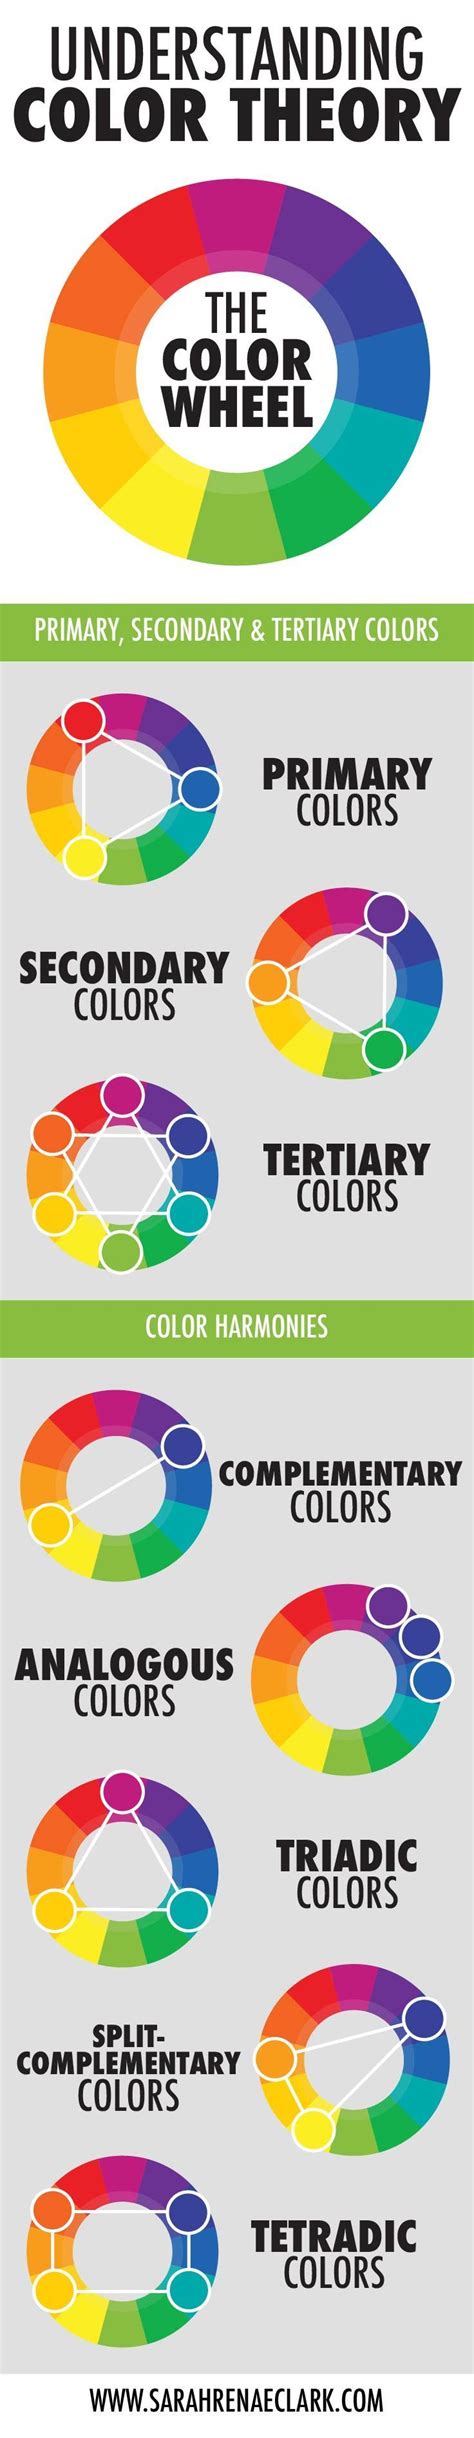 Psychology Understanding Color Theory The Basics Infographicnow